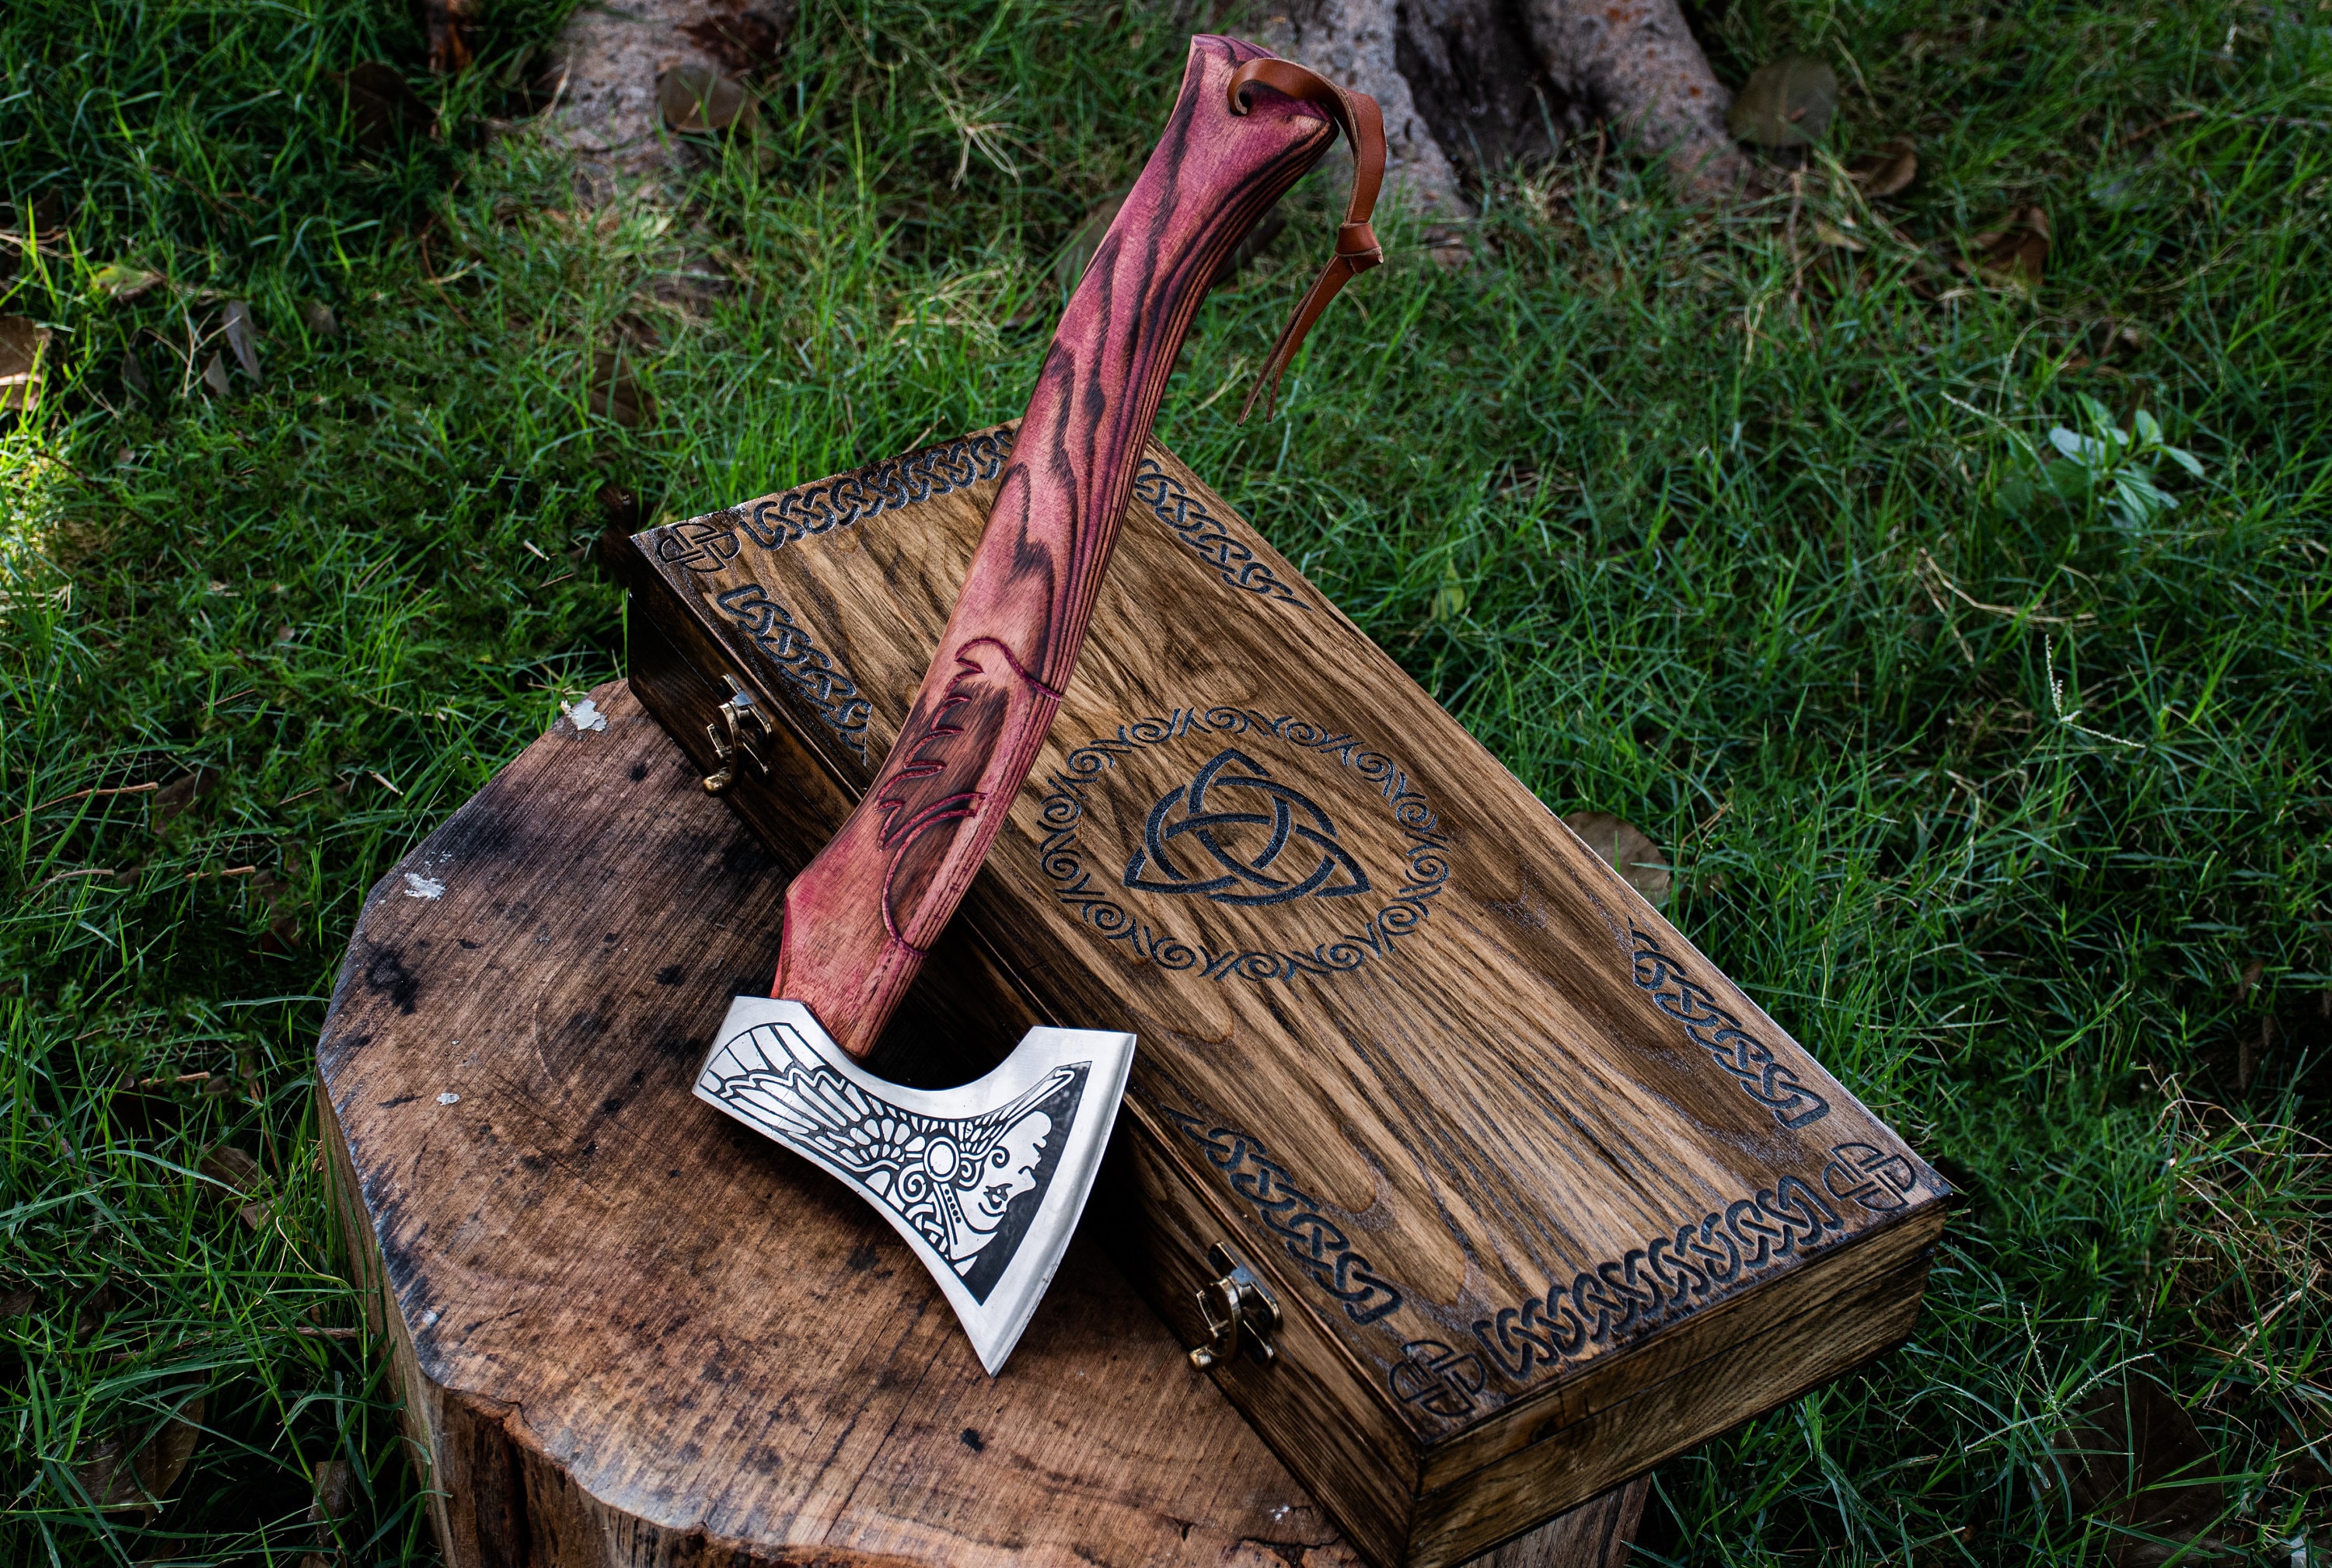 The nano axe. 2/3 in our kitchen axe set. Order now and we'll throw in a  piece of moss and a pack of 10 miniature logs, absolutely free!